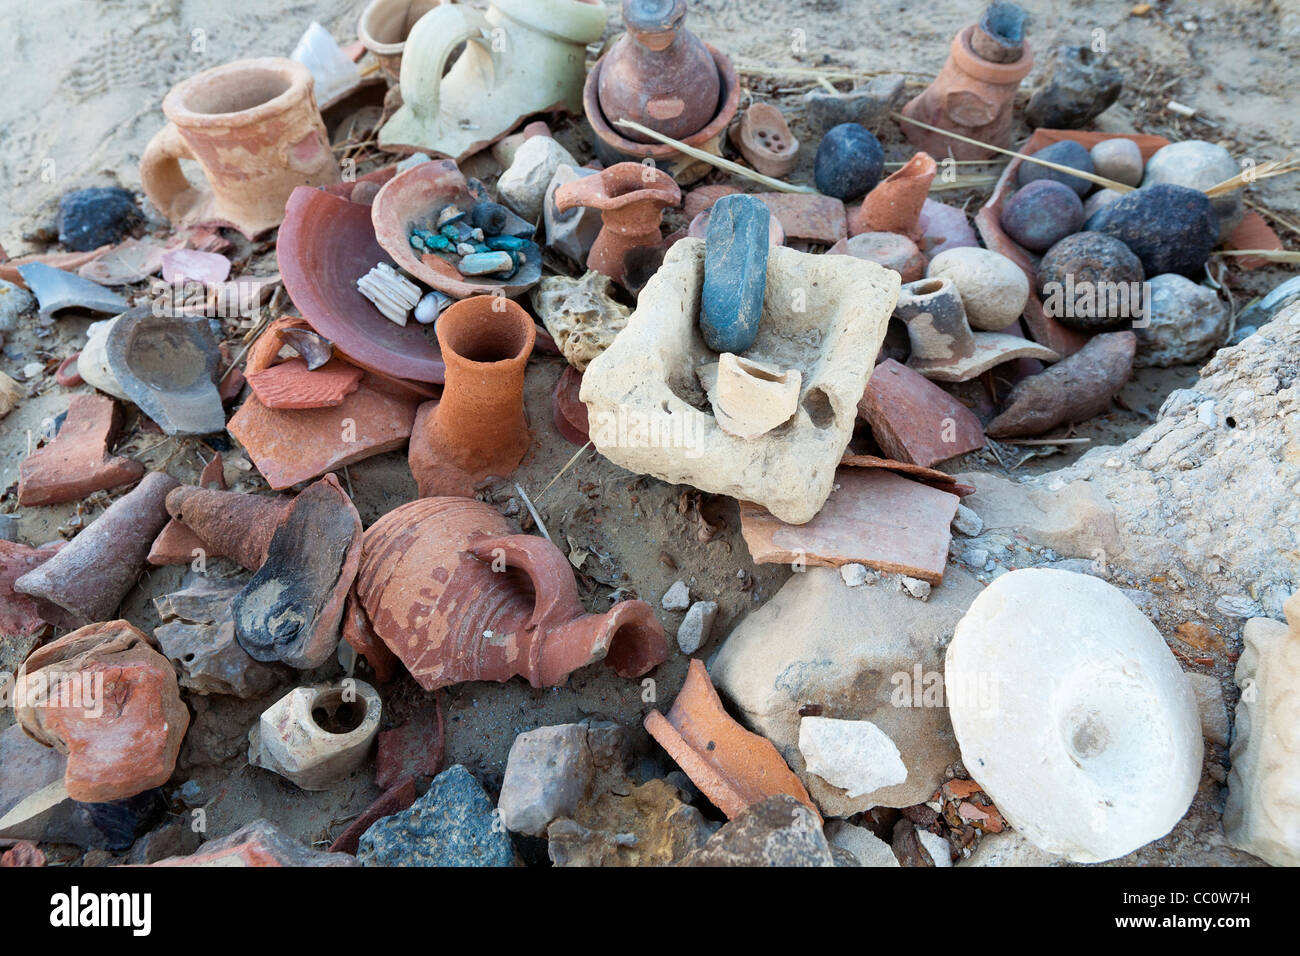 Artifacts to be found in the Priest village close to the Temple of Alexander the Great at Qasr al Migysbah, Bahariya Oasis Egypt Stock Photo